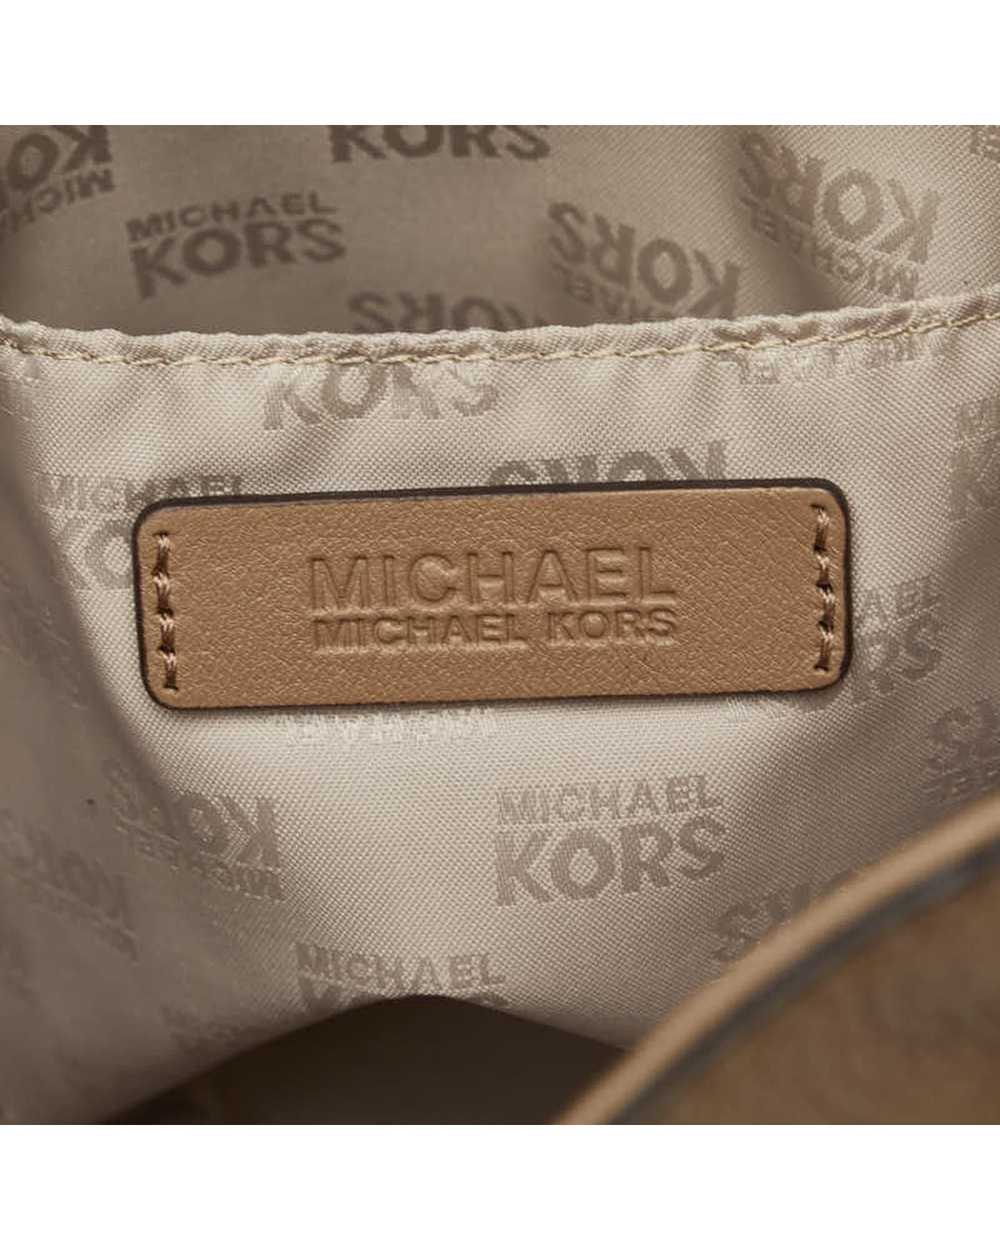 Michael Kors Leather Chained Tote Bag in Brown - image 8